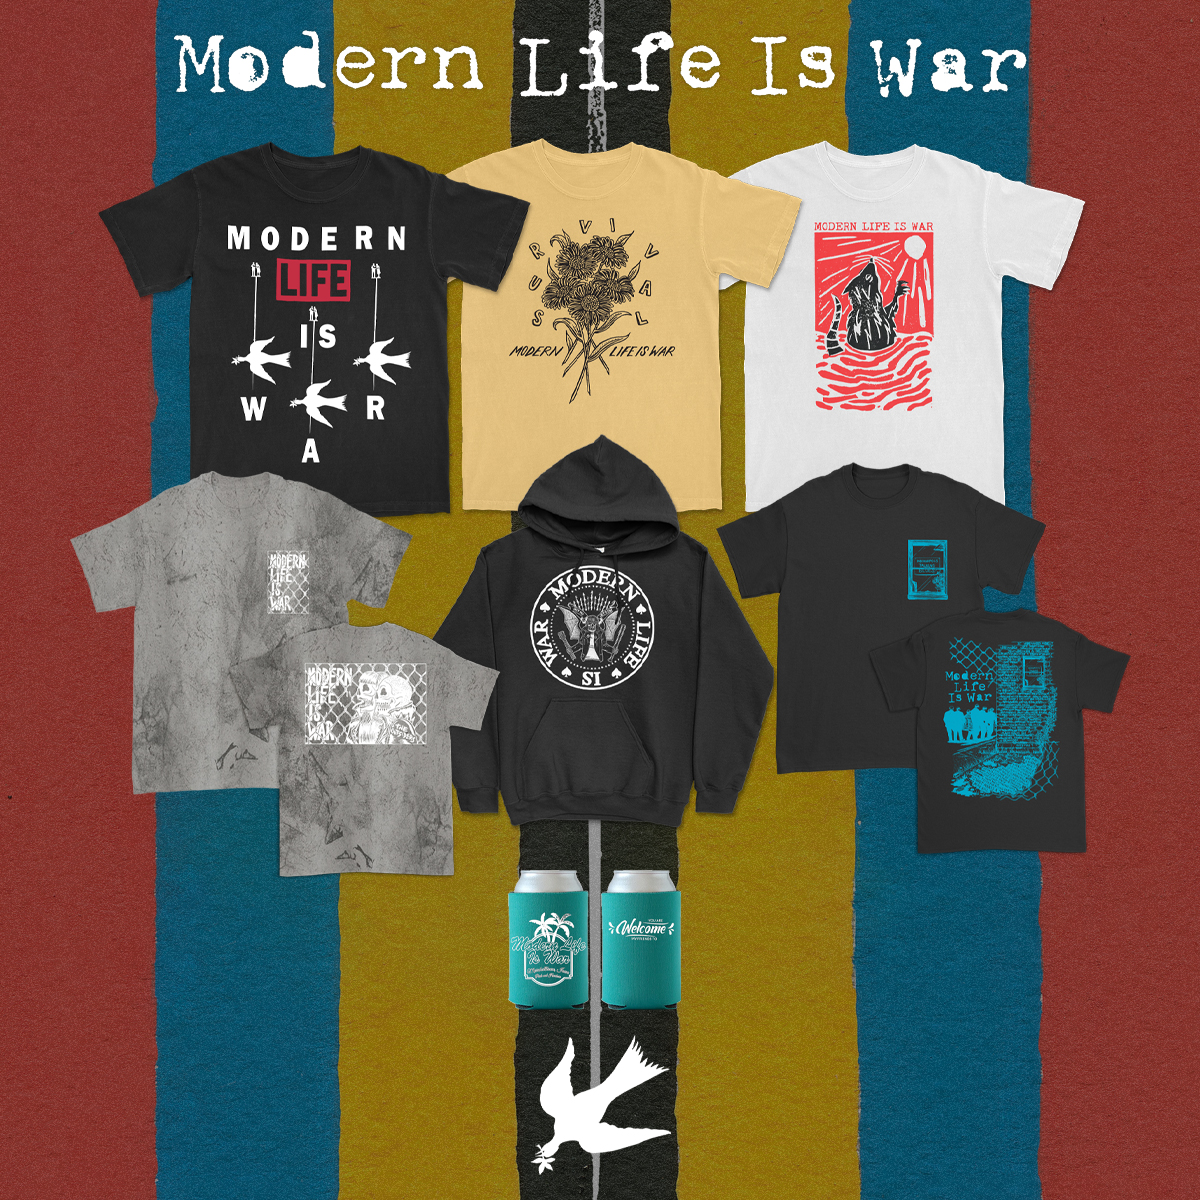 Our Kings Road merch store has been revamped with new items | modernlifeiswar.kingsroadmerch.com